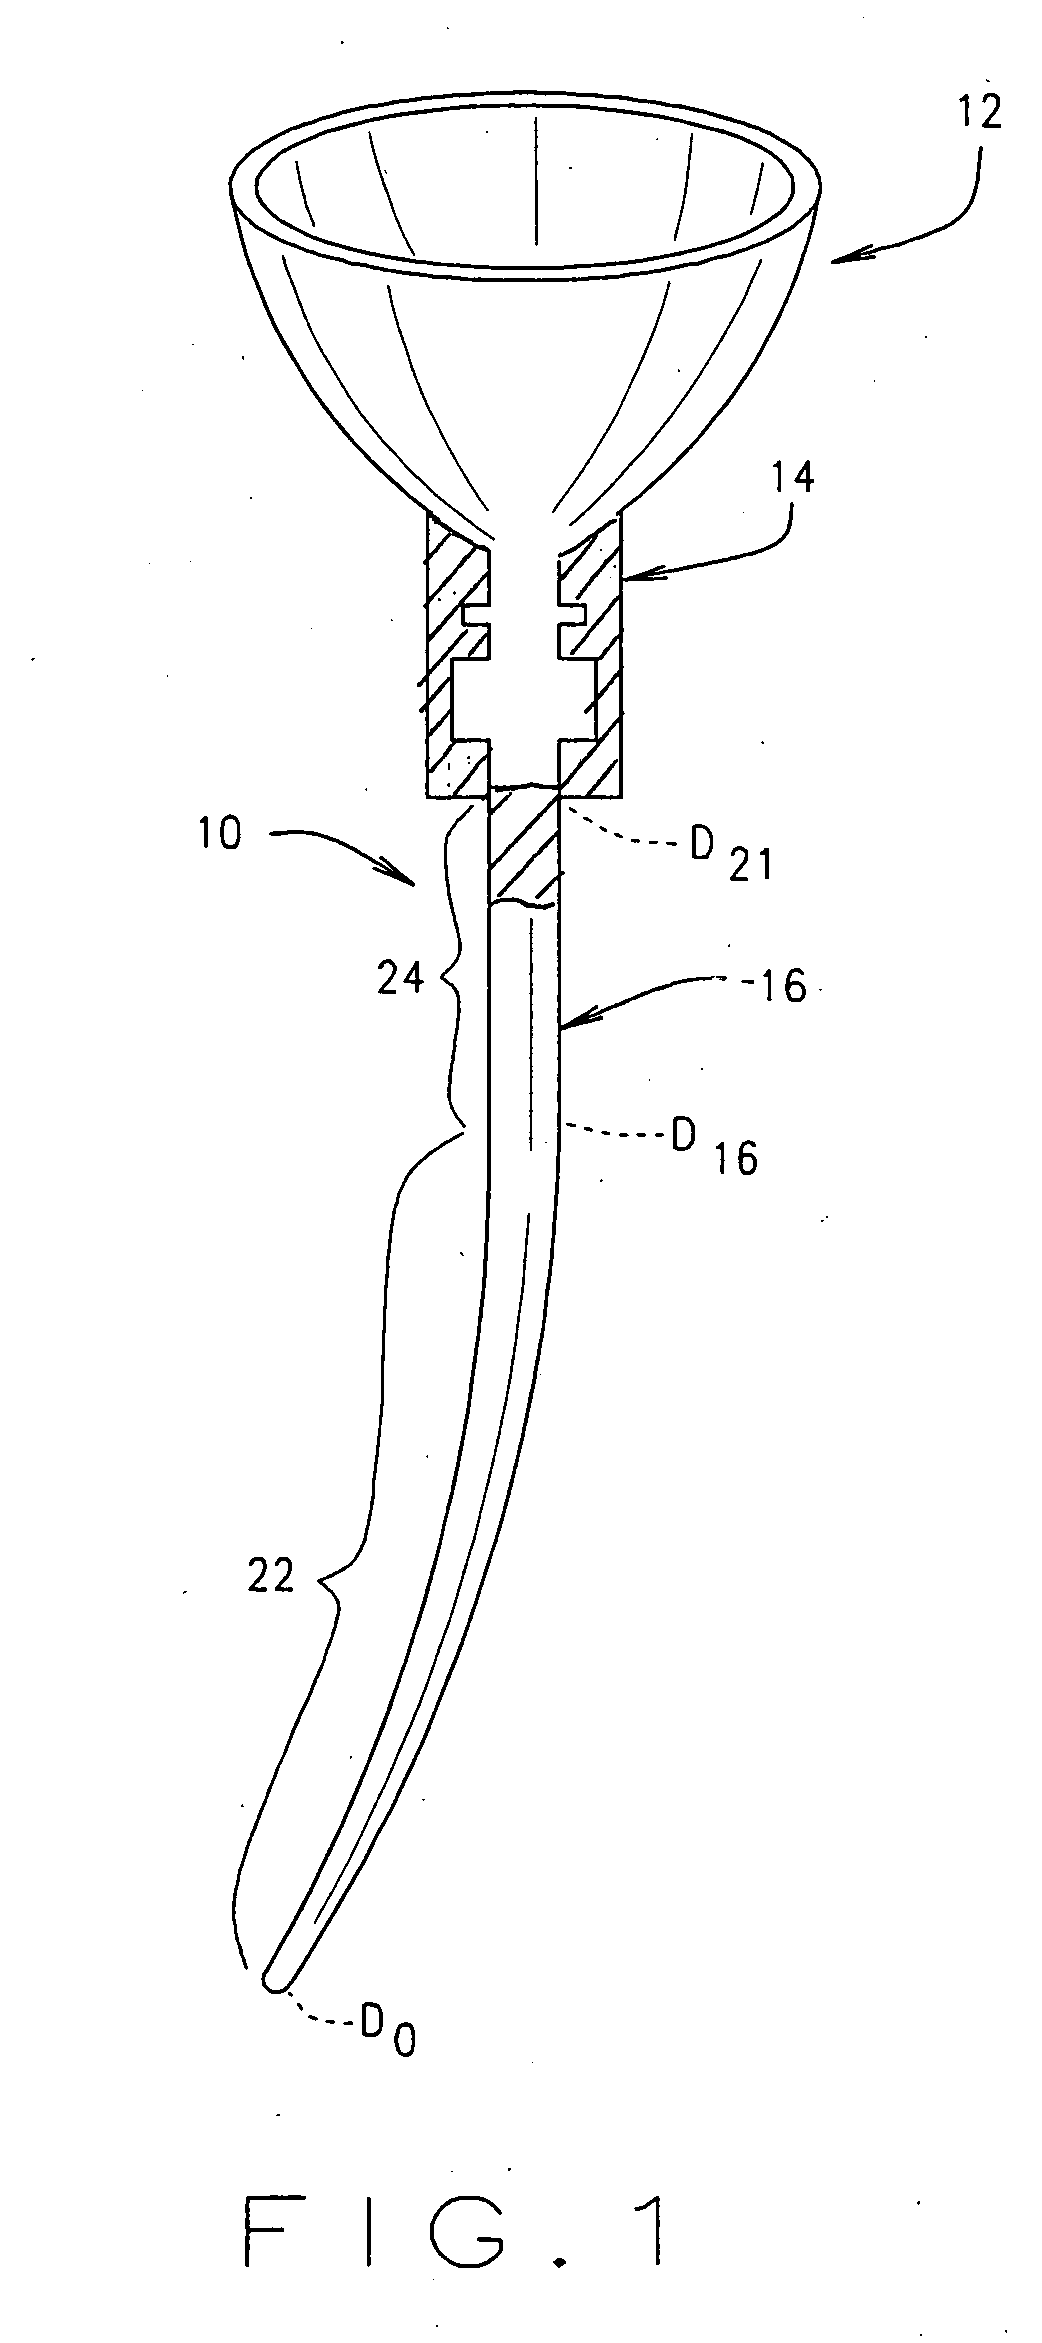 Apparatus for cleaning a root canal system